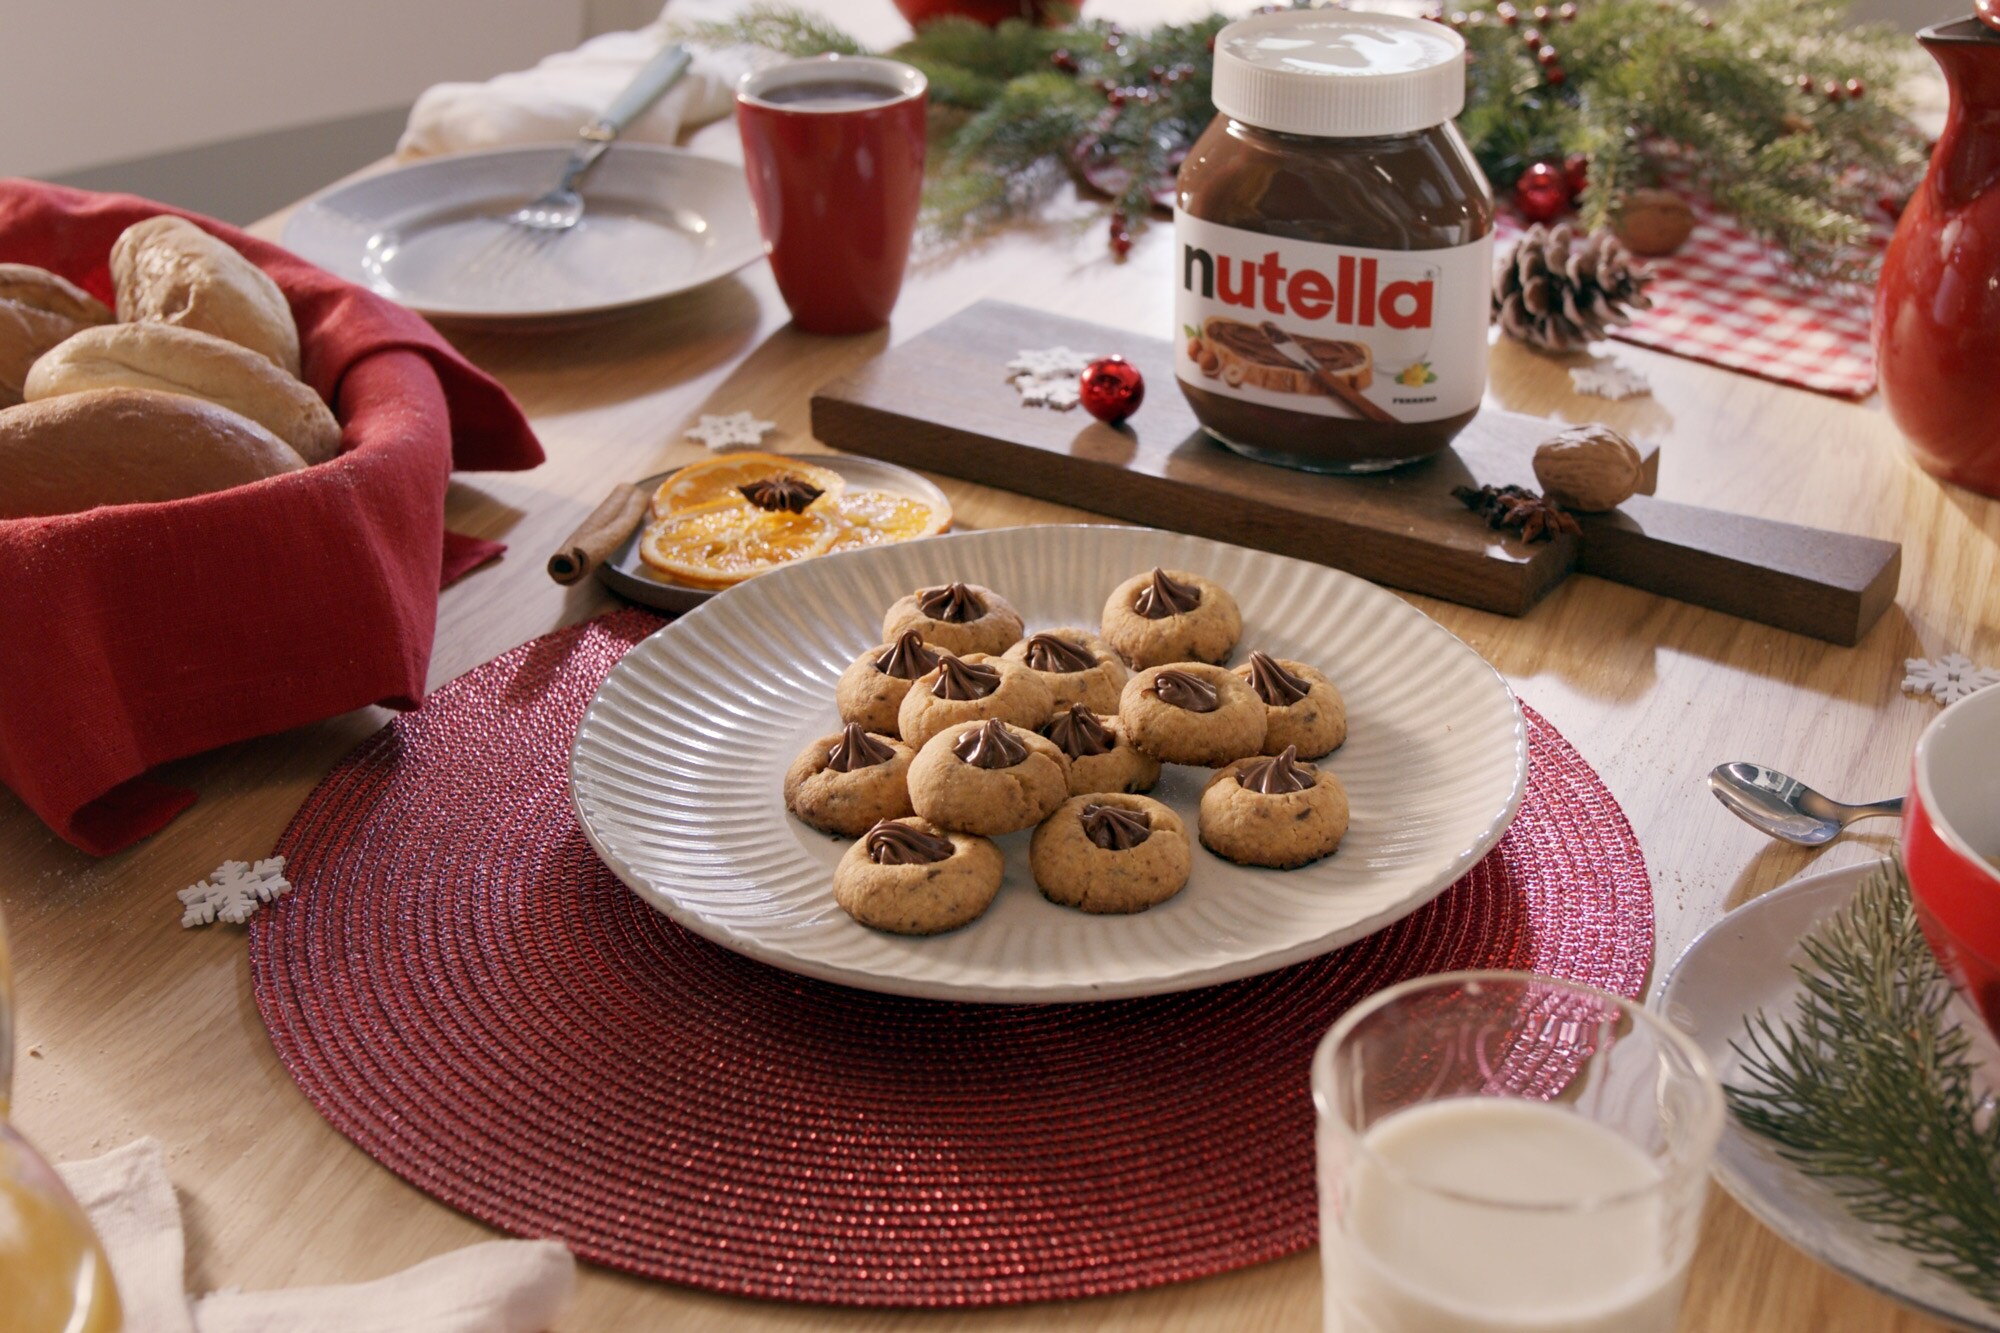 Thumbprint cookies by Nutella® recipe